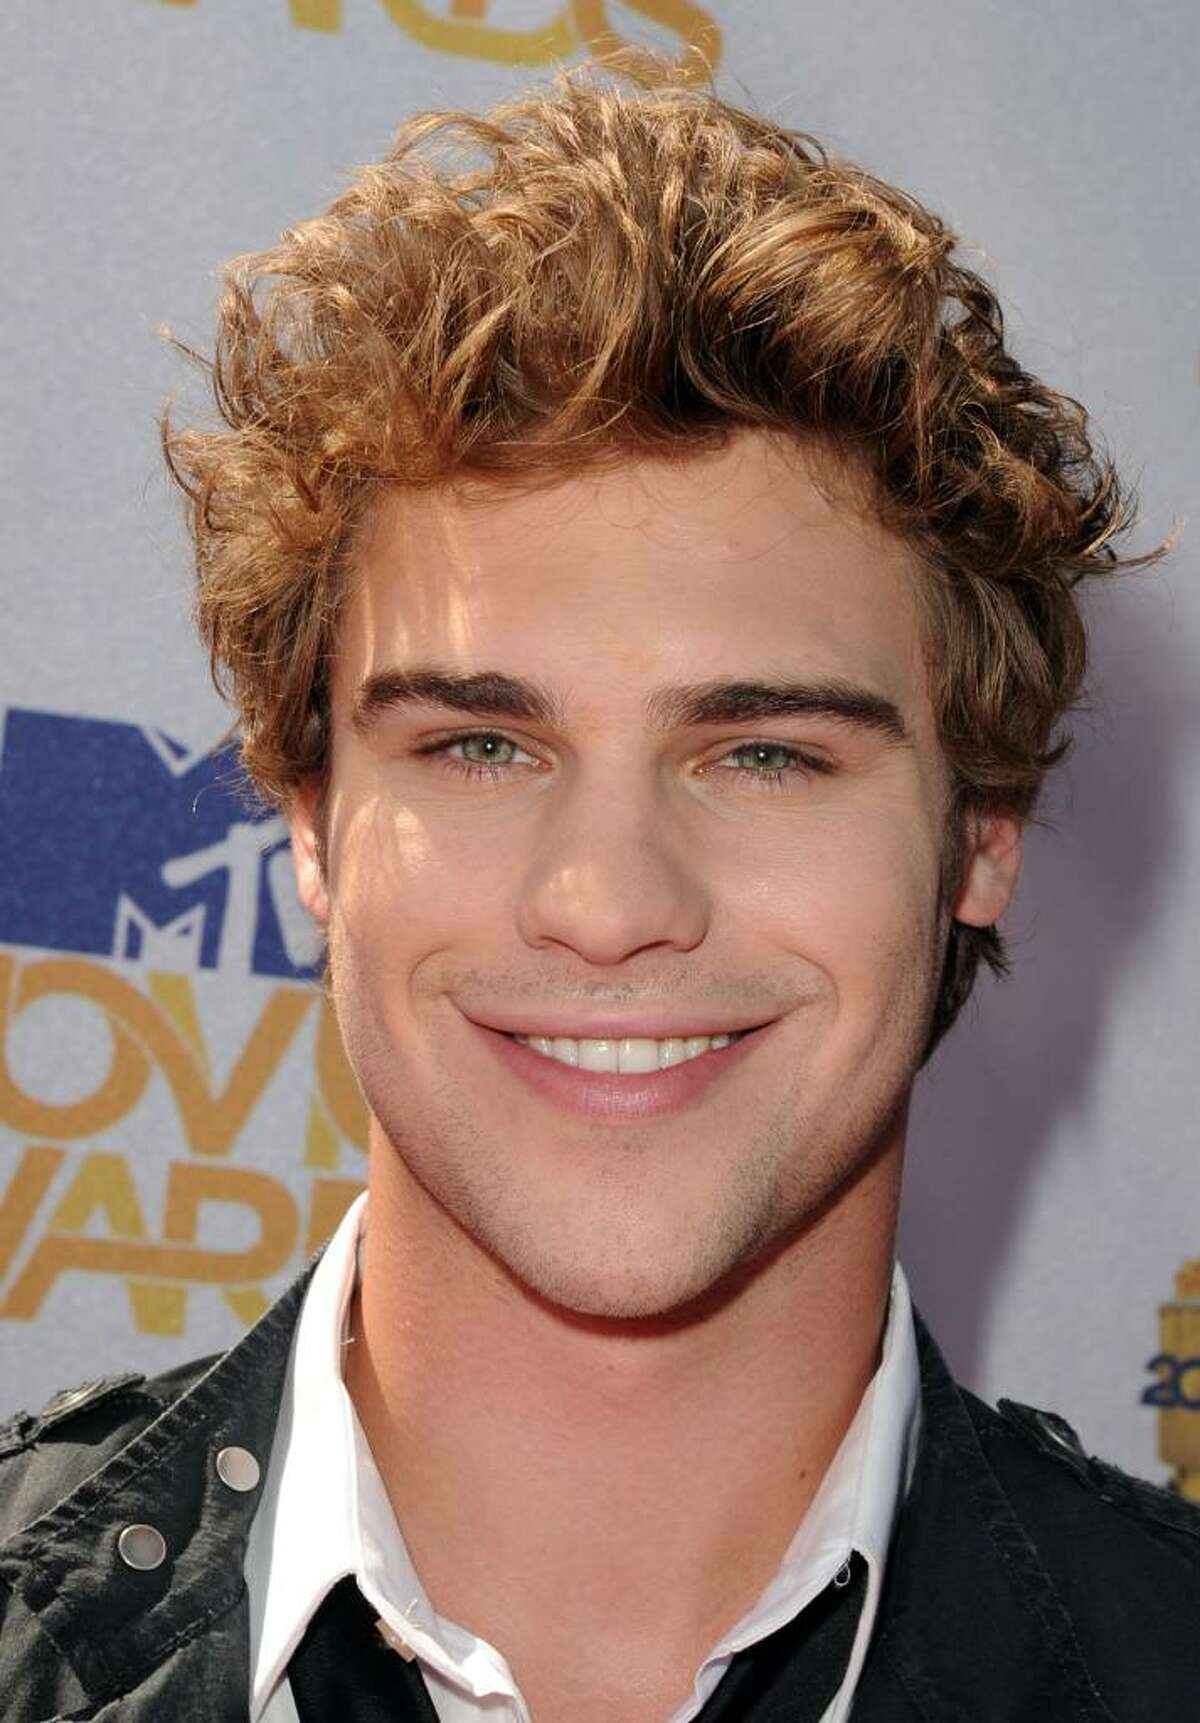 UNIVERSAL CITY, CA - JUNE 06: Grey Damon arrives at the 2010 MTV Movie Awards held at the Gibson Amphitheatre at Universal Studios on June 6, 2010 in Universal City, California. (Photo by Kevin Winter/Getty Images) *** Local Caption *** Grey Damon